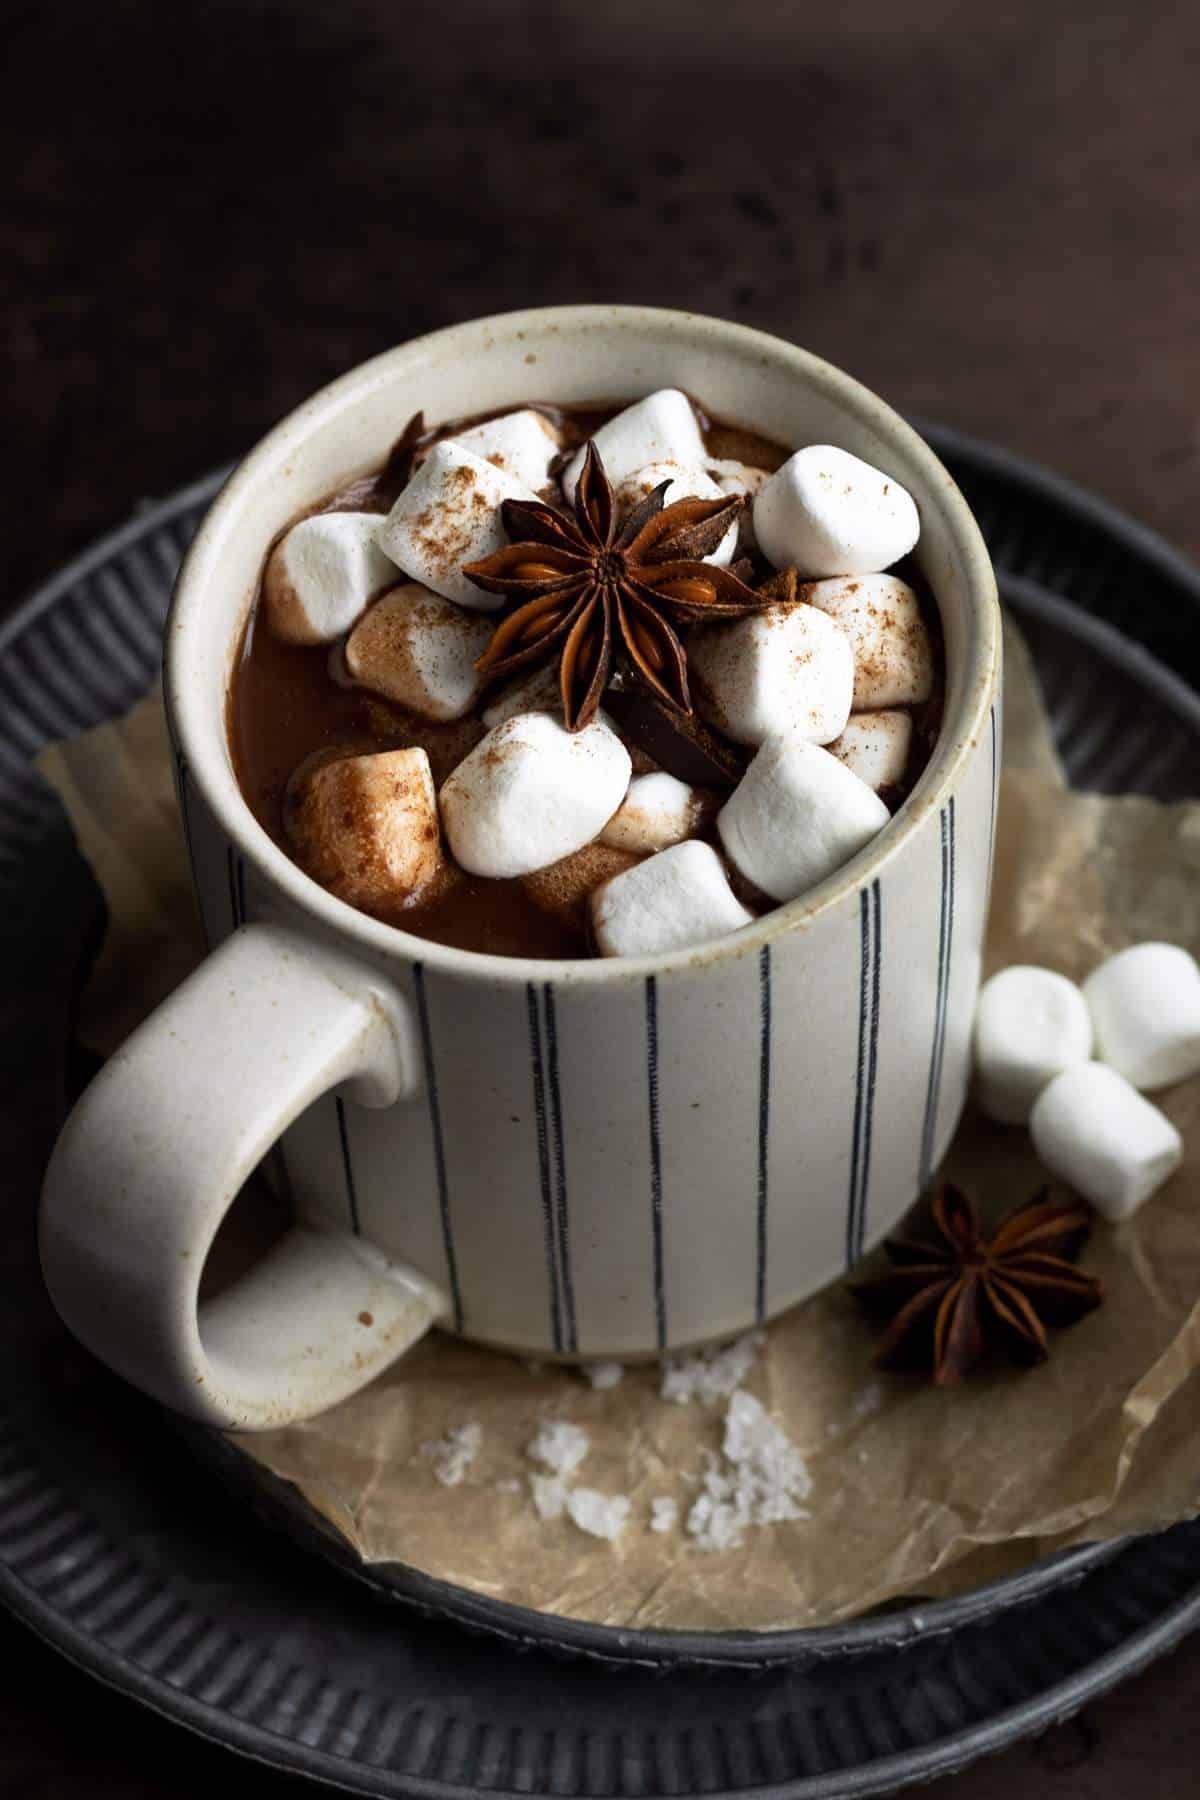 Hot chocolate in a mug on a serving tray.